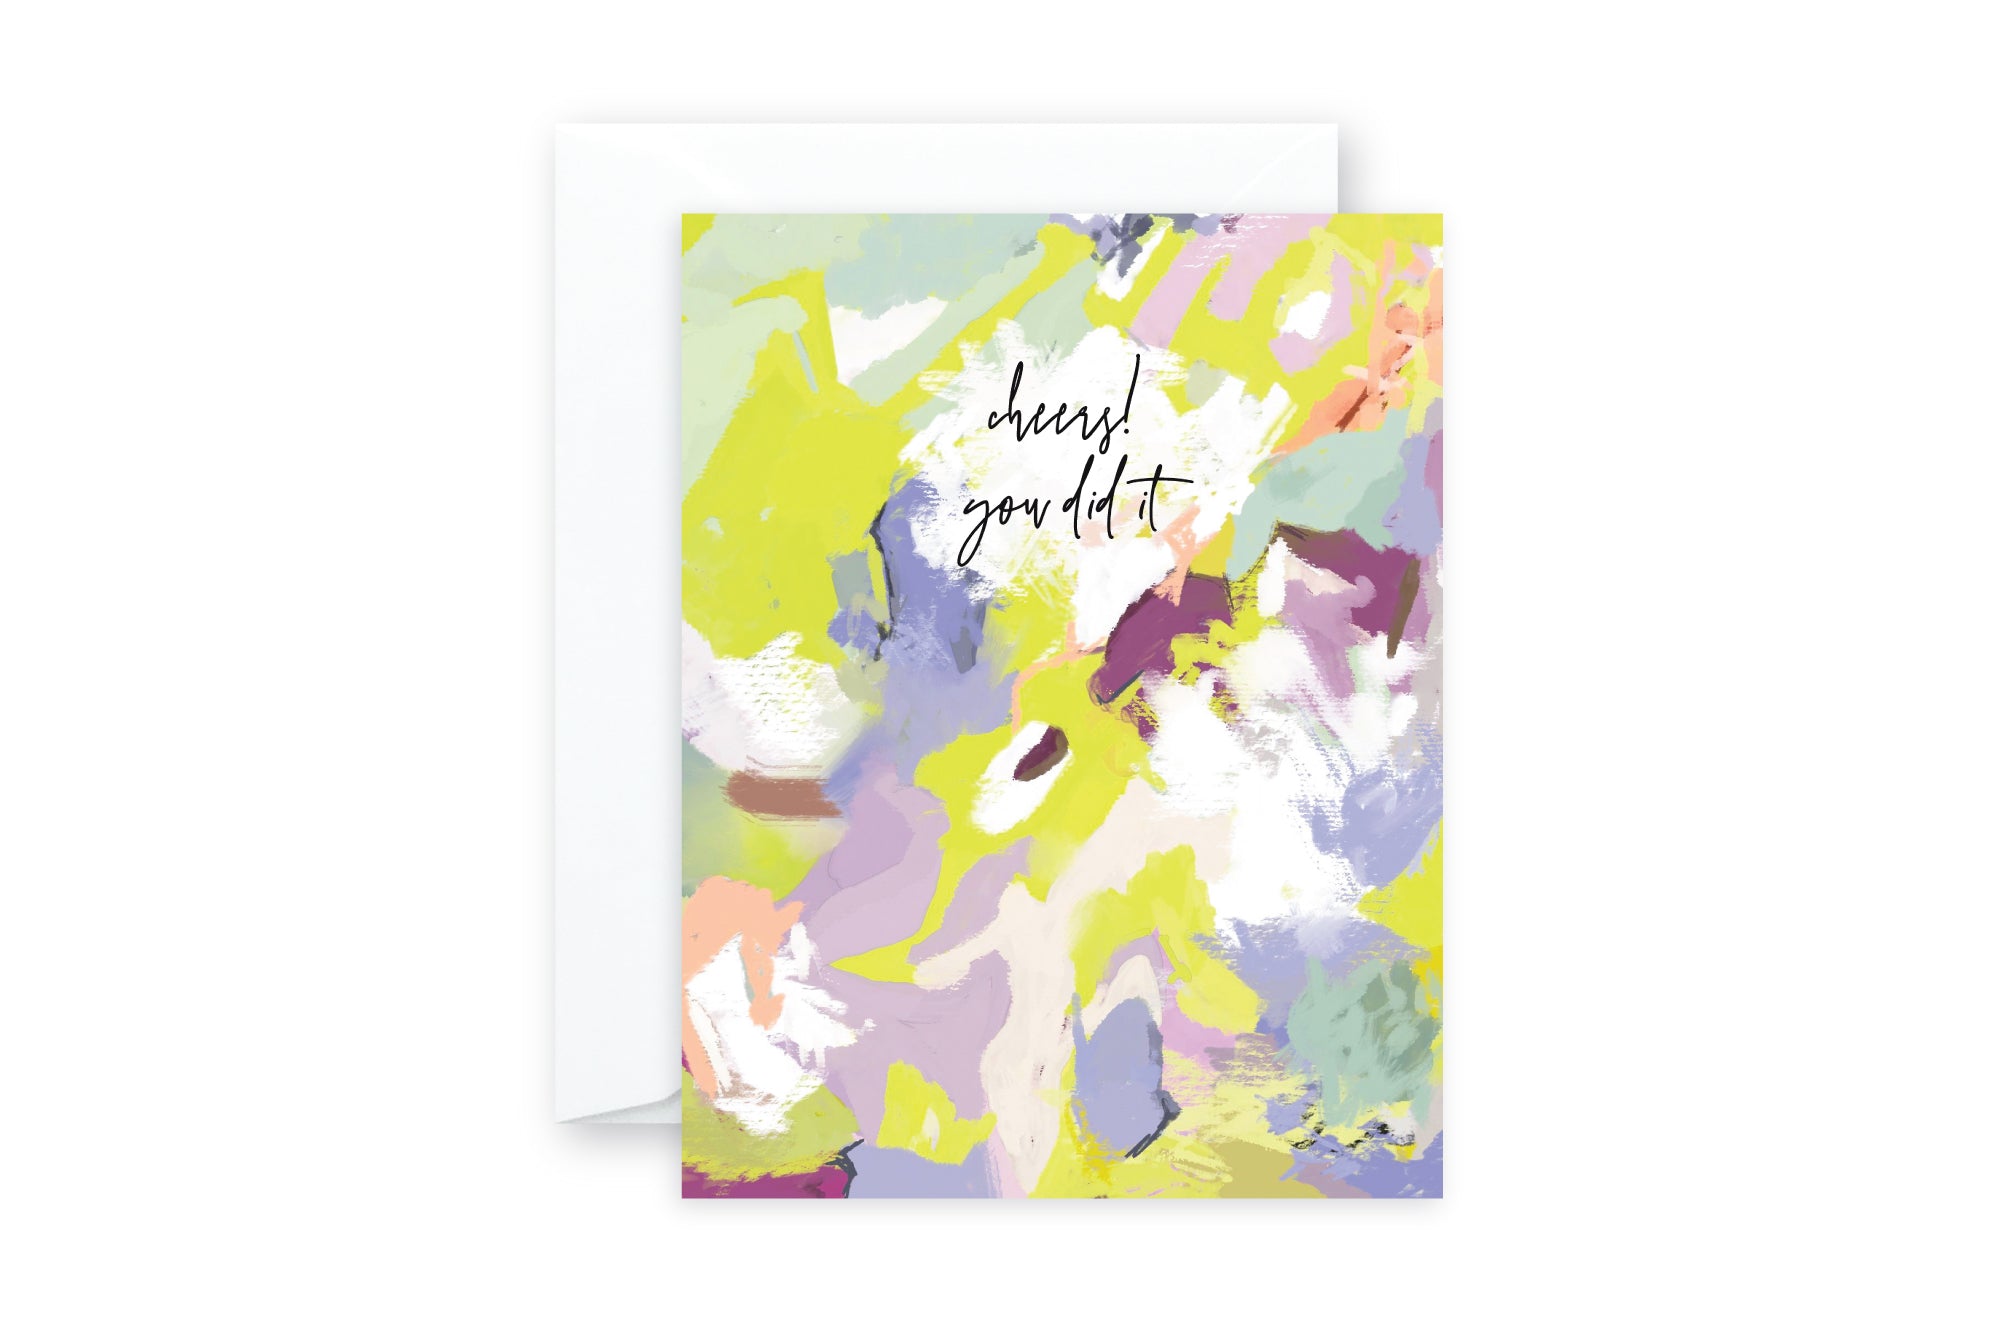 Congratulatory greeting card with bright colorful abstract pattern in coral, mint, chartreuse, lilac. Text is Cheers! You did it.. white envelope.